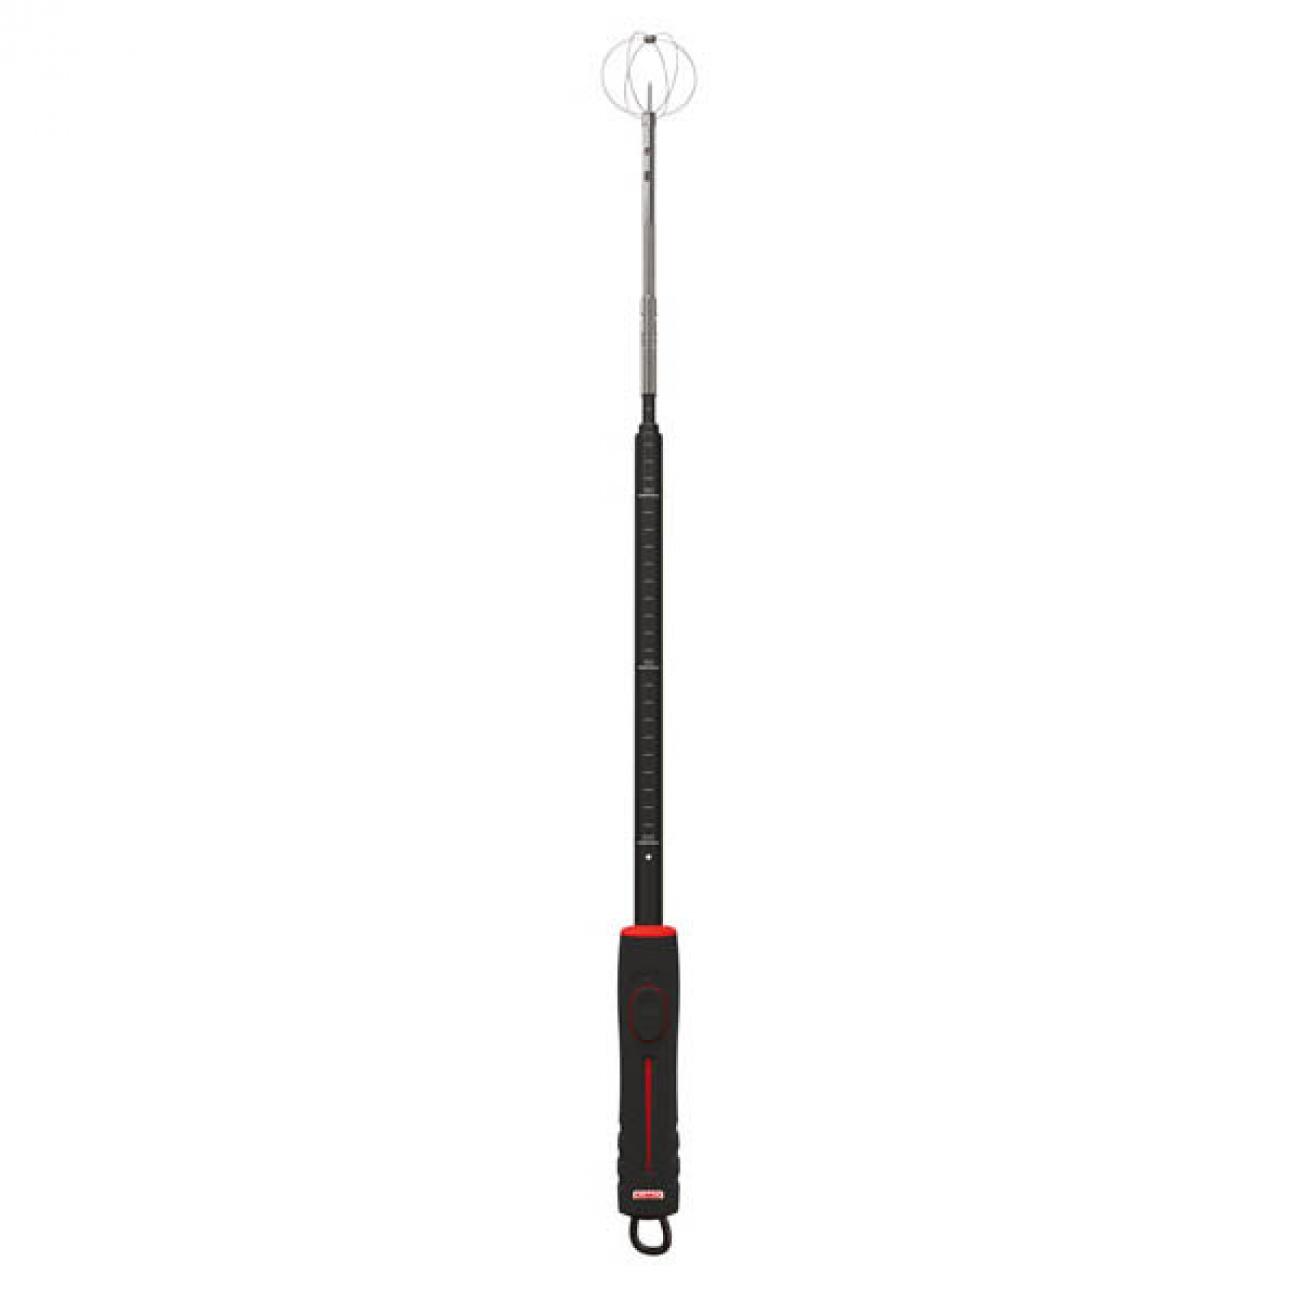 Omnidirectionnel probe SOM 900 For class 210 / 310 multi-function portables